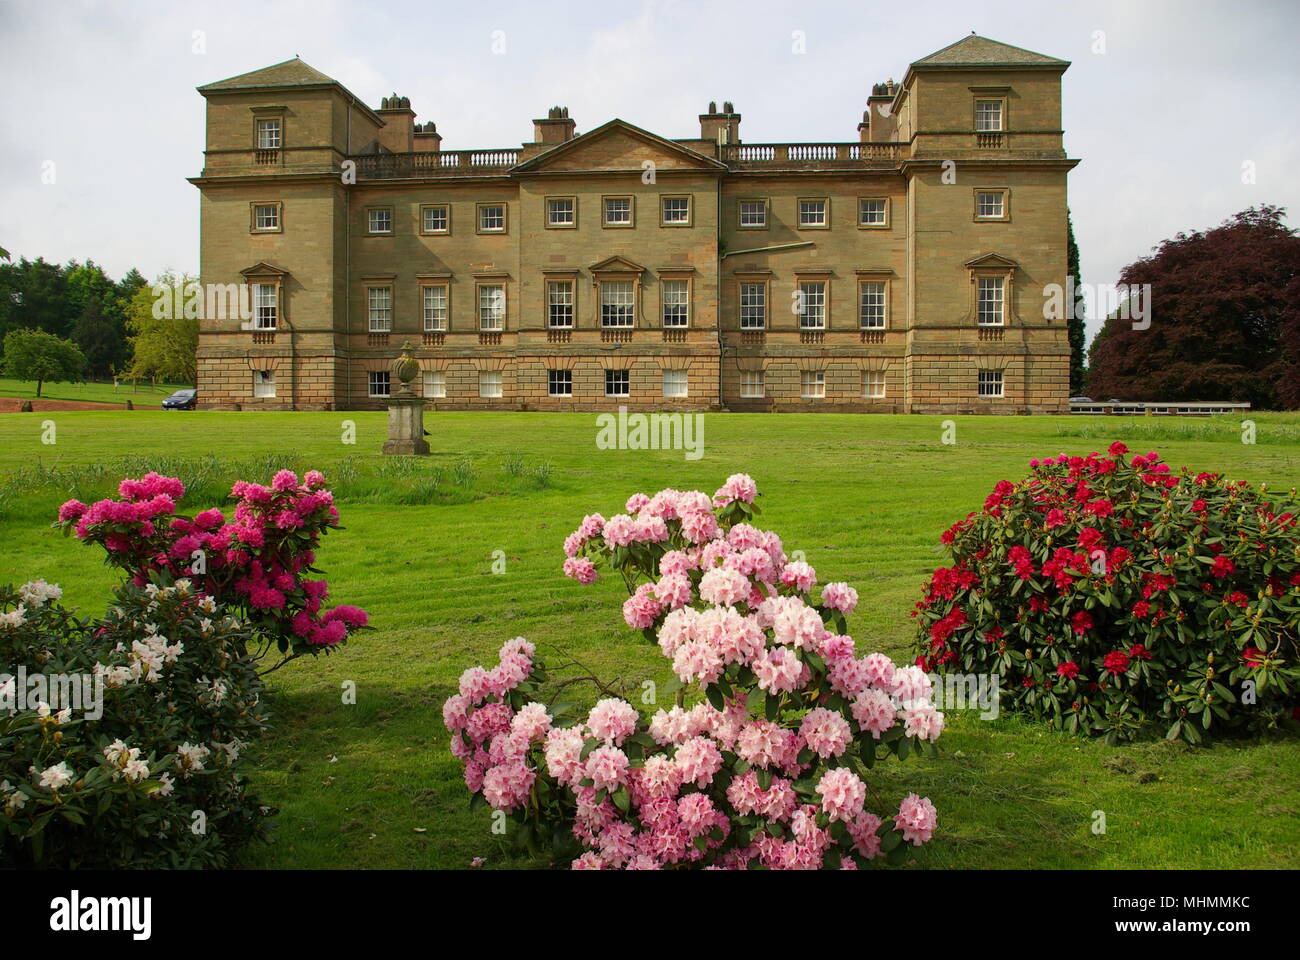 View of Hagley Hall, Hagley, Worcestershire, with rhododendron bushes in the foreground.  The house was built in the 18th century in the Palladian style.     Date: May 2008 Stock Photo